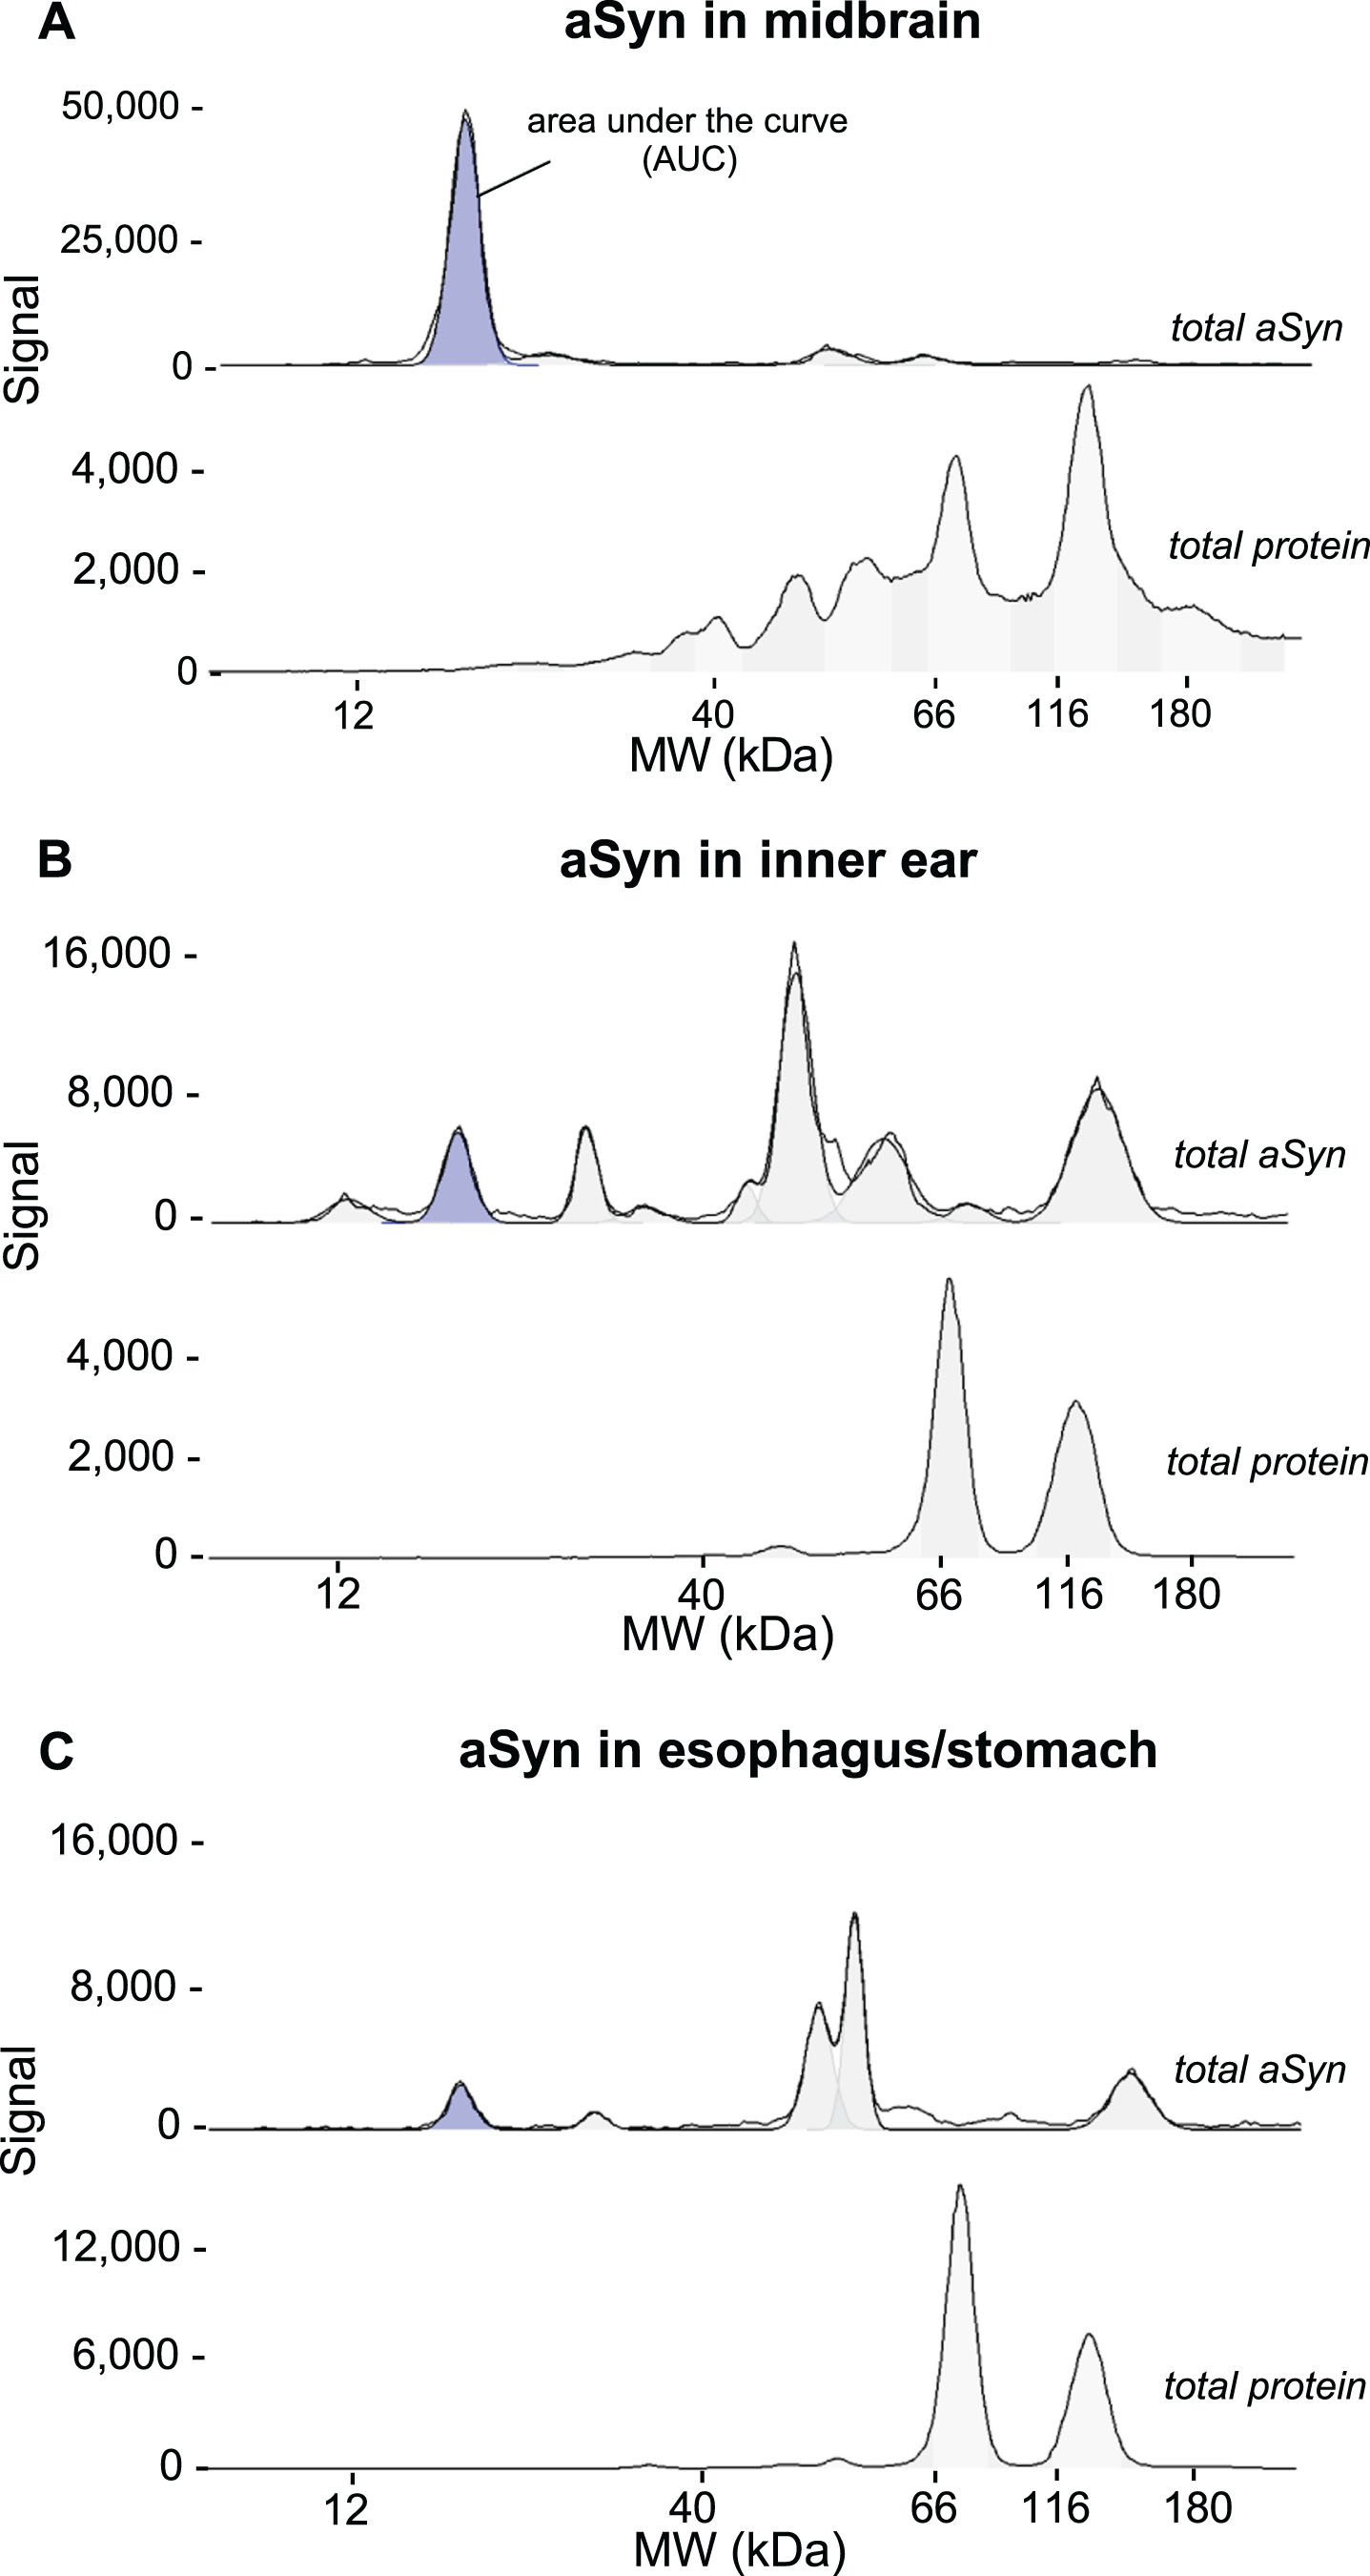 Detection of aSyn in tissue lysates through CE (Simple Western) immunoblot. Tissue lysates of five biological replicates of 18-month-old WT C57BL/6J mice were loaded in duplicates and separated by CE. The protein concentration used for midbrain lysates was 0.2 mg/ml (A), for inner ear 0.8 mg/ml (B) and for esophagus/stomach lysates 0.4 mg/ml (C). Immunodetection of aSyn was performed with an anti-total aSyn antibody in a dilution of 0.025 mg/ml (1 : 40) and an HRP-conjugated secondary antibody. The total protein signal was detected using a total protein detection kit and HRP conjugated streptavidin and quantified by automated chemiluminescent signal measurements using the Compass for Simple Western software of the area under the curve (AUC). The aSyn detection signal is depicted in blue within the electropherograms at 21 kDa. The black lines represent both the selected electropherogram curve and a curve representing the adaptation to the fitted peaks. A single electropherogram curve was chosen to illustrate the total protein signal (A,B,C).